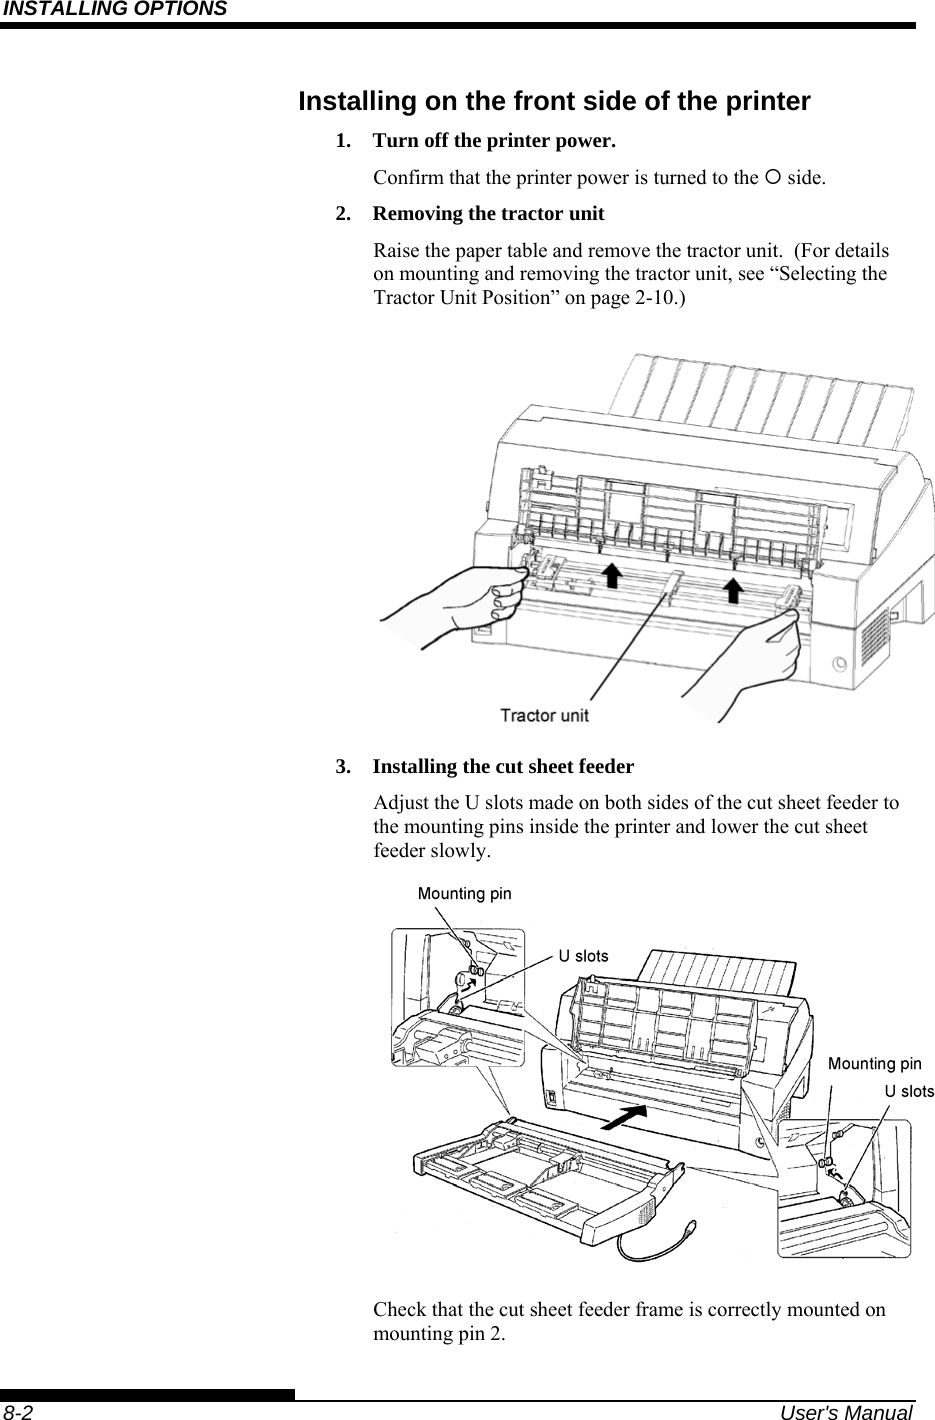 INSTALLING OPTIONS    8-2  User&apos;s Manual Installing on the front side of the printer 1.  Turn off the printer power. Confirm that the printer power is turned to the { side. 2.  Removing the tractor unit Raise the paper table and remove the tractor unit.  (For details on mounting and removing the tractor unit, see “Selecting the Tractor Unit Position” on page 2-10.)  3.  Installing the cut sheet feeder Adjust the U slots made on both sides of the cut sheet feeder to the mounting pins inside the printer and lower the cut sheet feeder slowly.    Check that the cut sheet feeder frame is correctly mounted on mounting pin 2. 